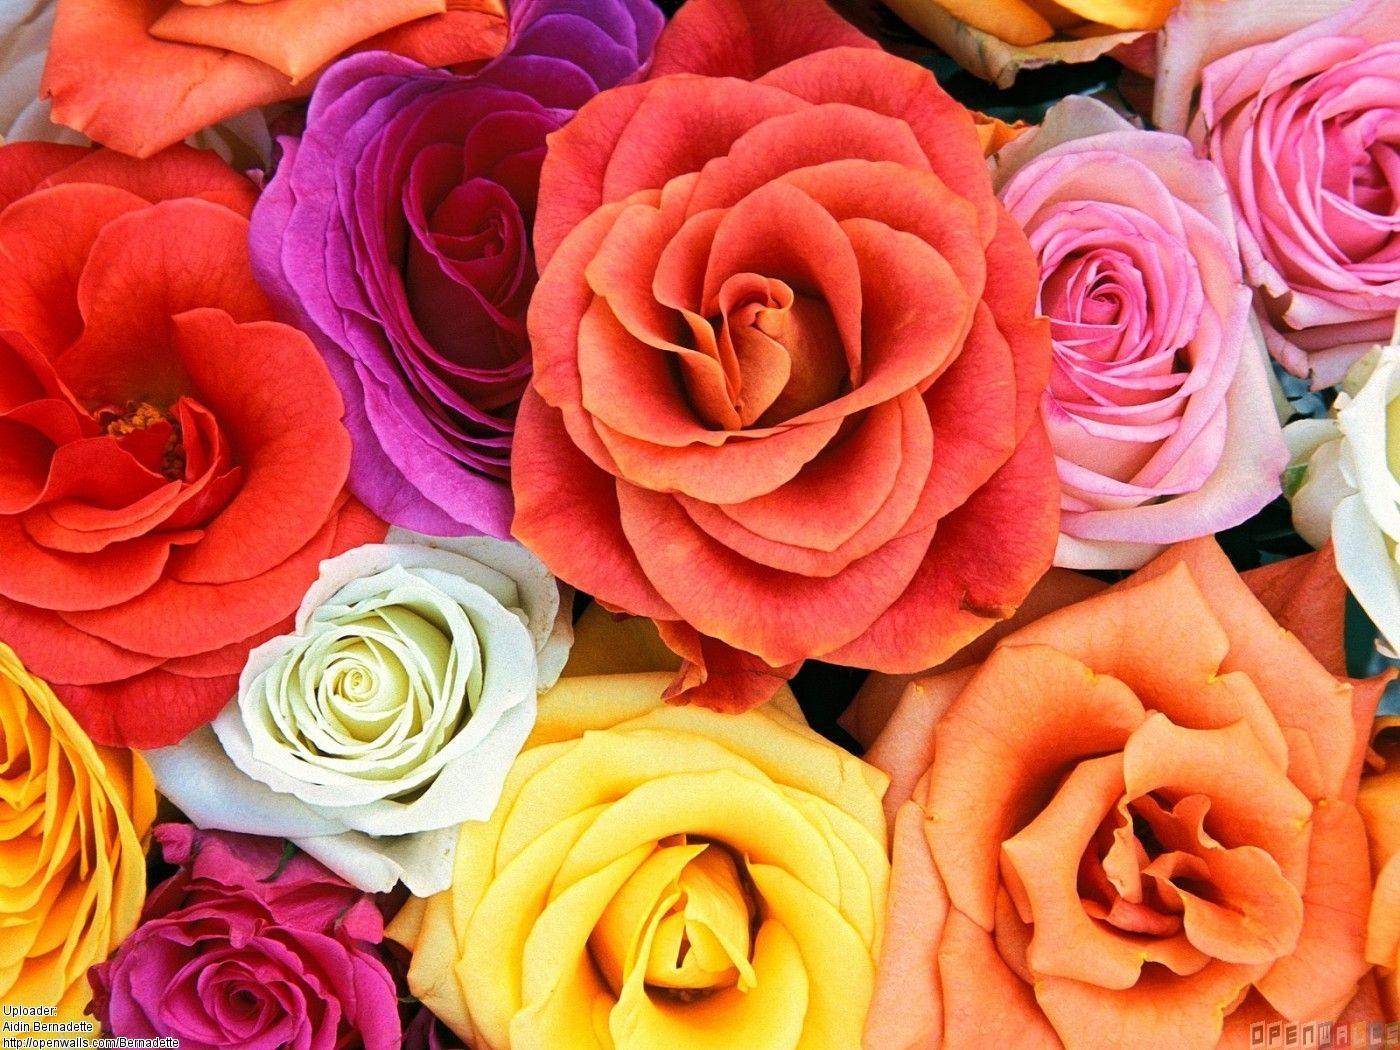 colorful rose wallpapers